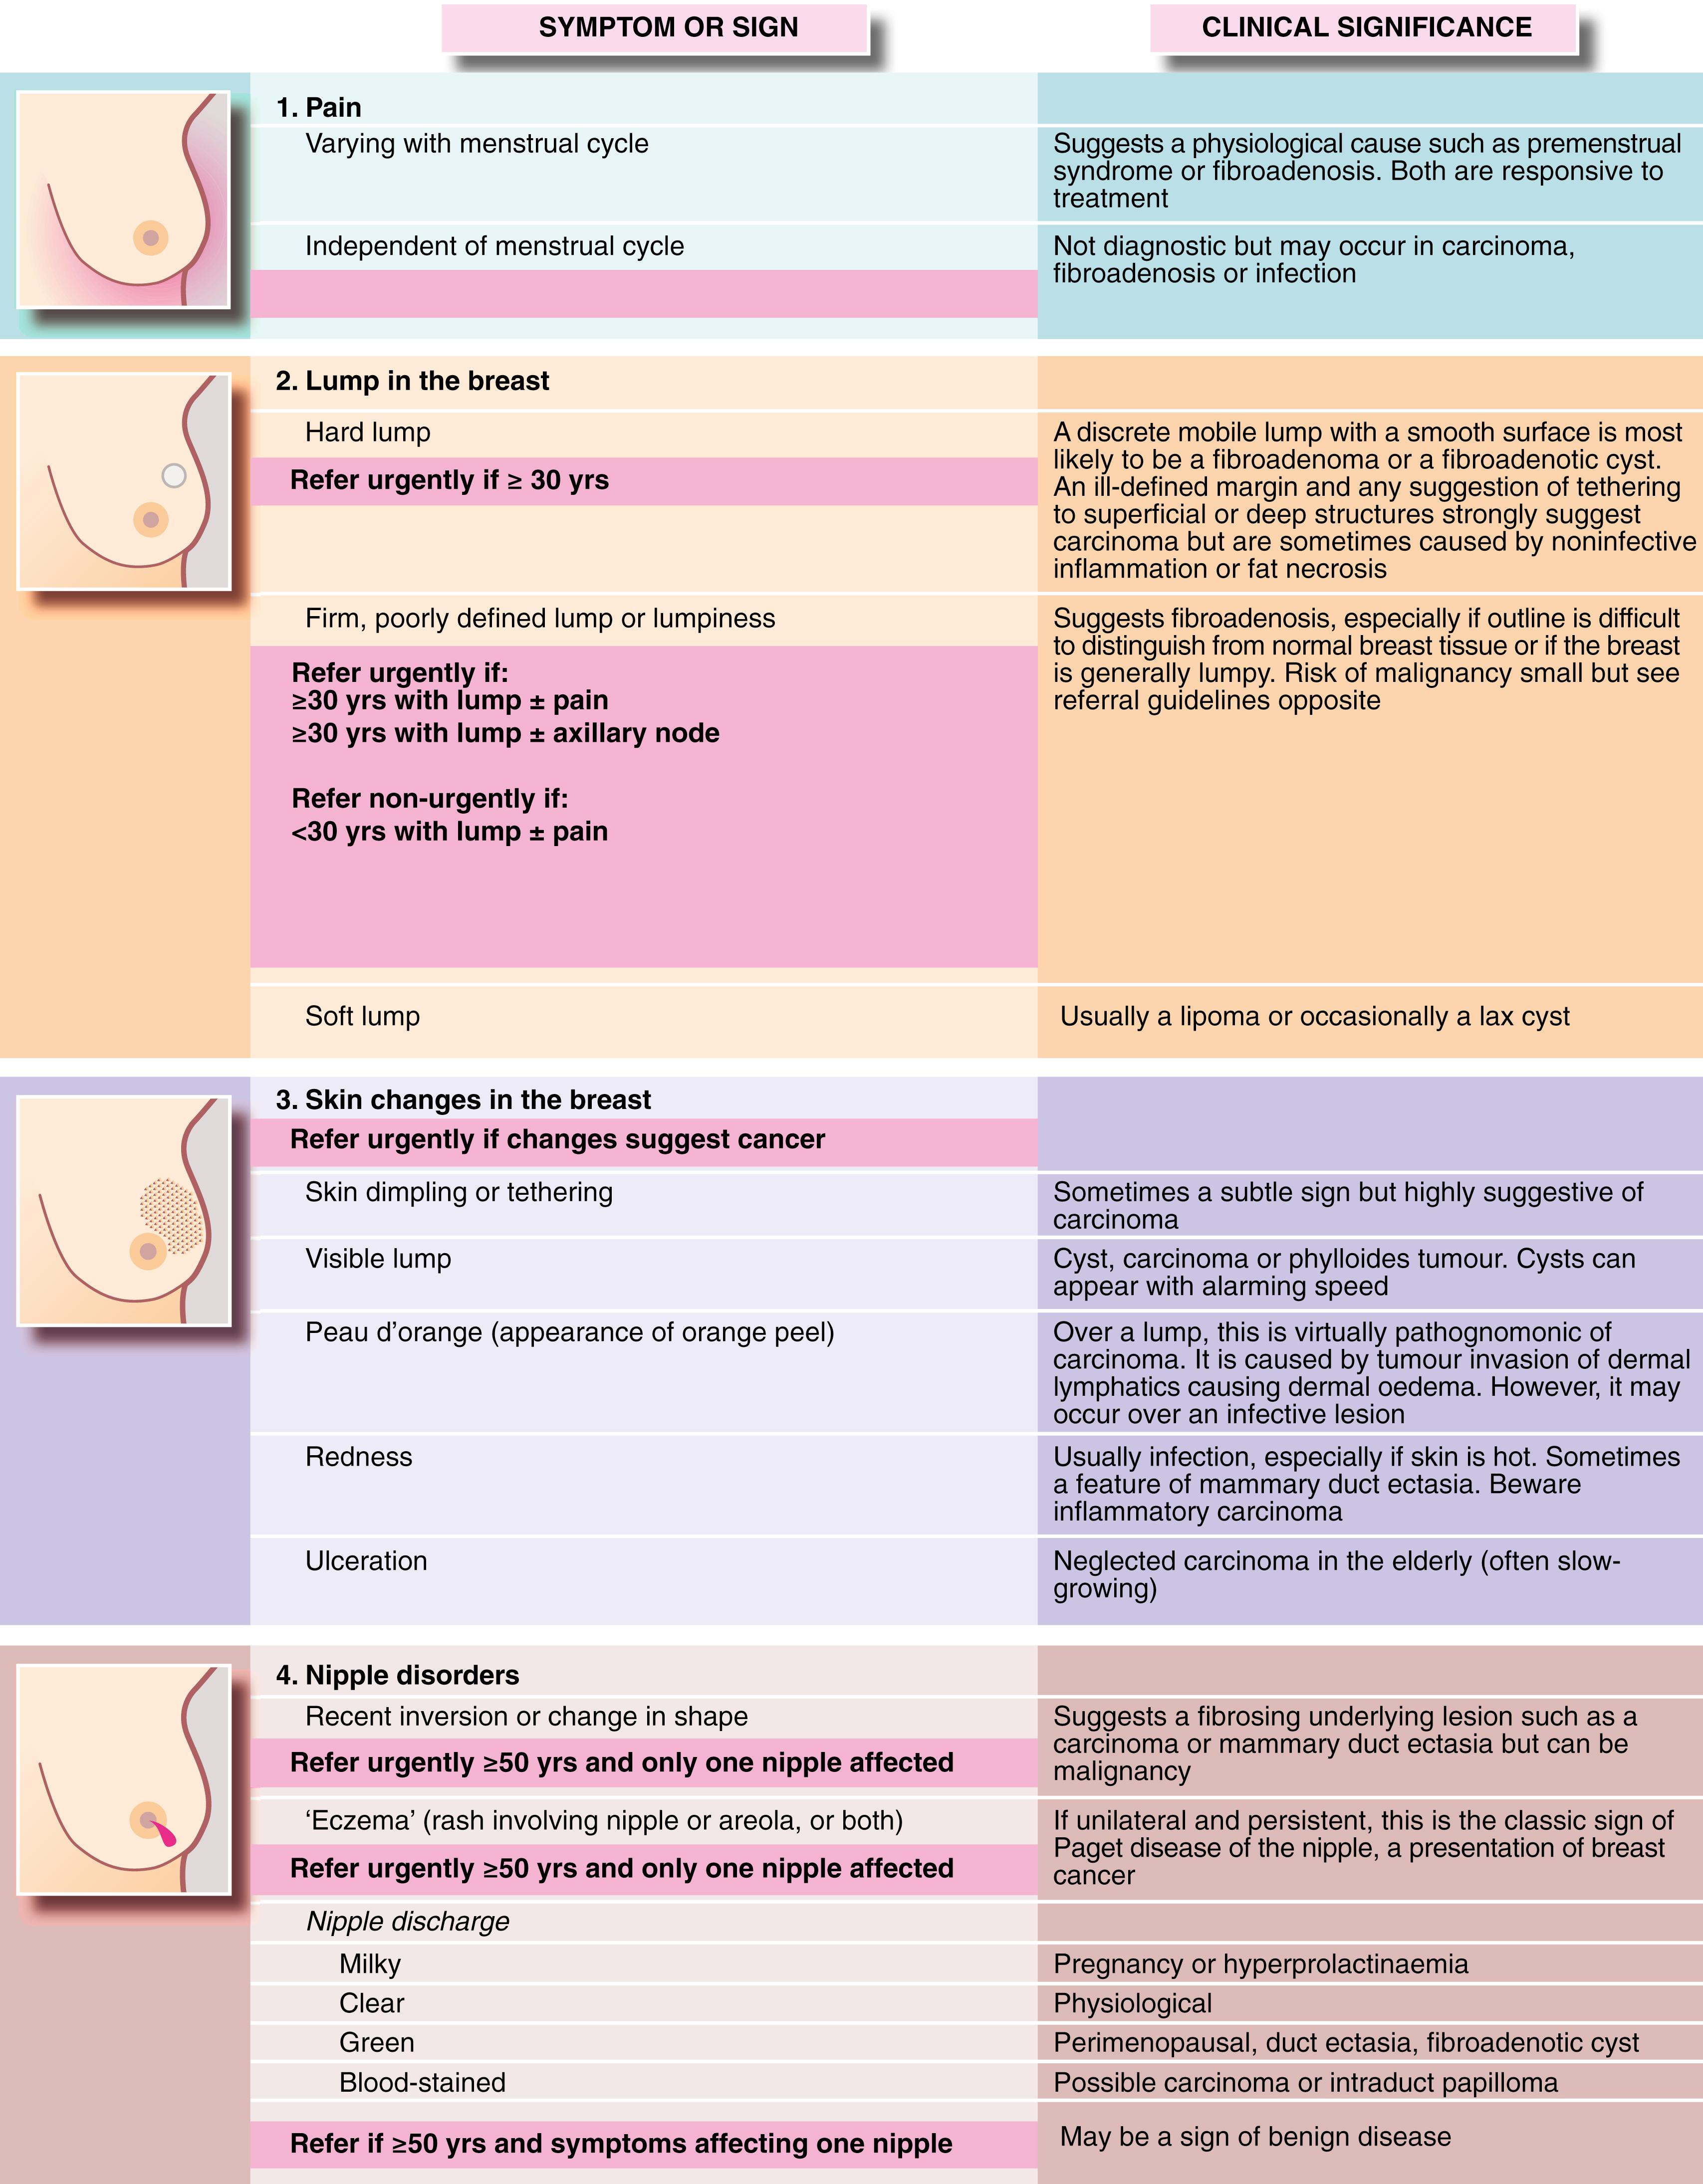 Fig. 45.1, Symptoms and Signs of Breast Disease (see also Figs 45.3 and 45.4.)